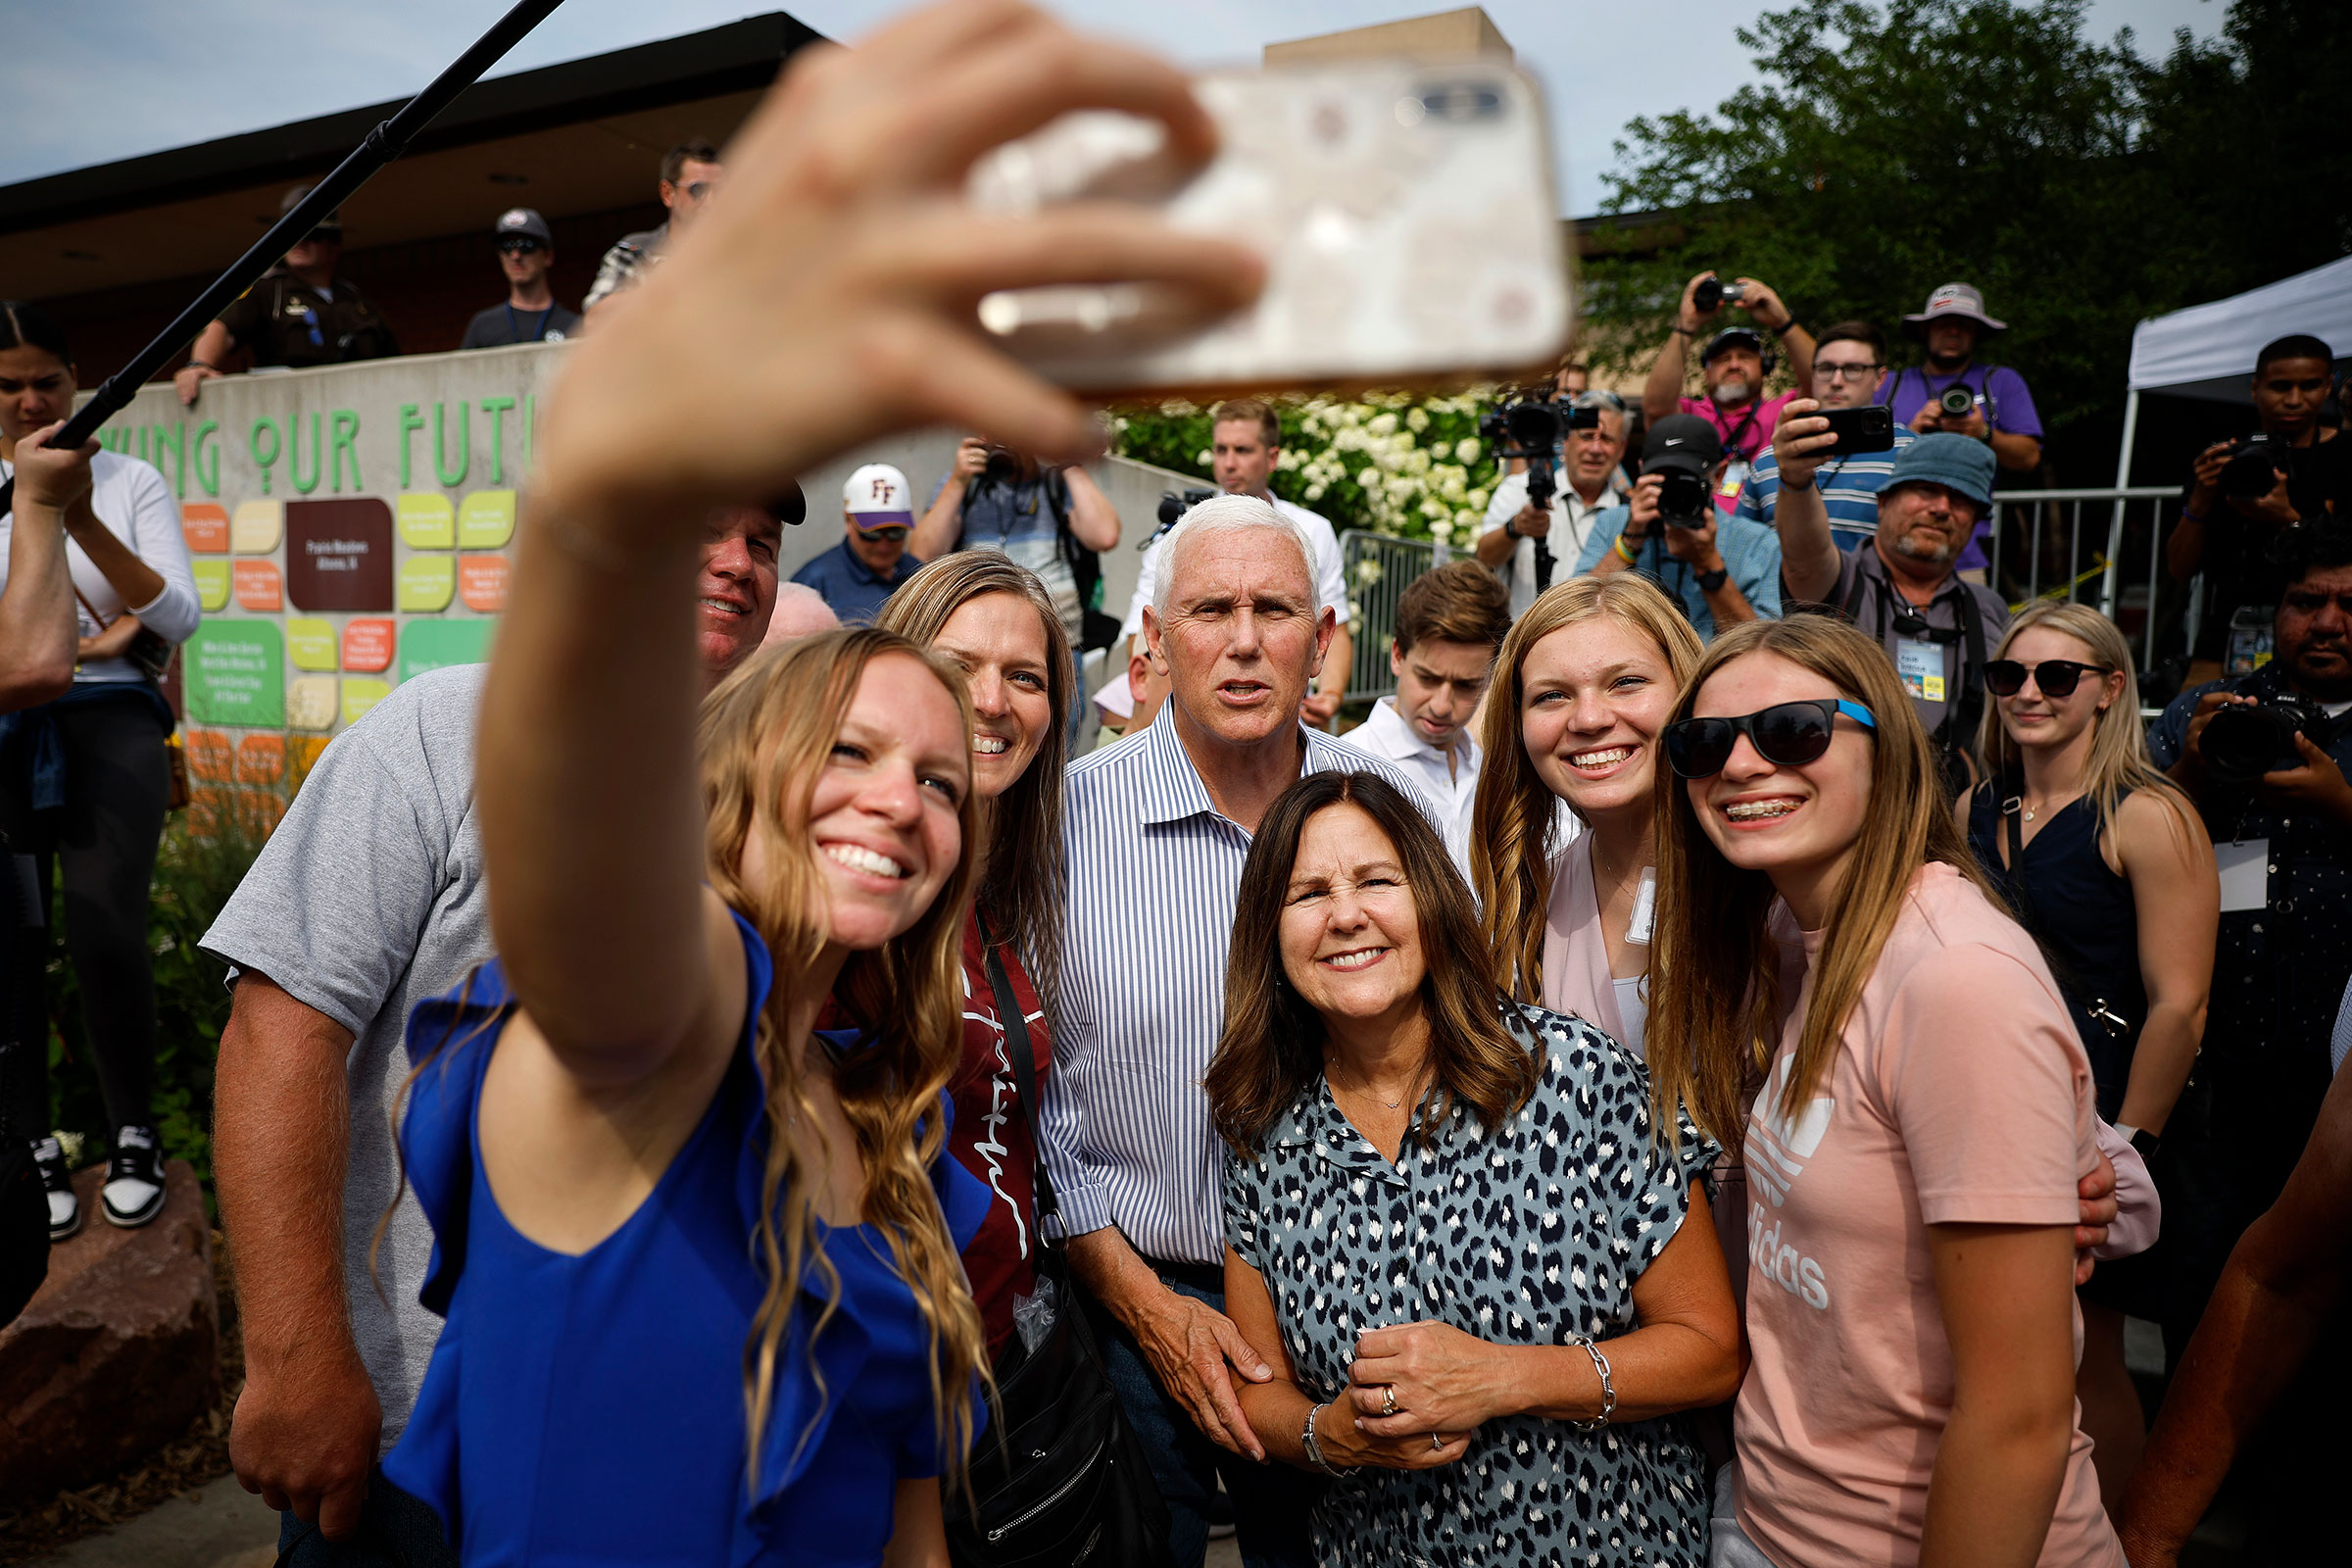 Republican presidential candidate former Vice President Mike Pence and his wife Karen Pence pose for selfies with supporters on Aug. 10. (Chip Somodevilla—Getty Images)